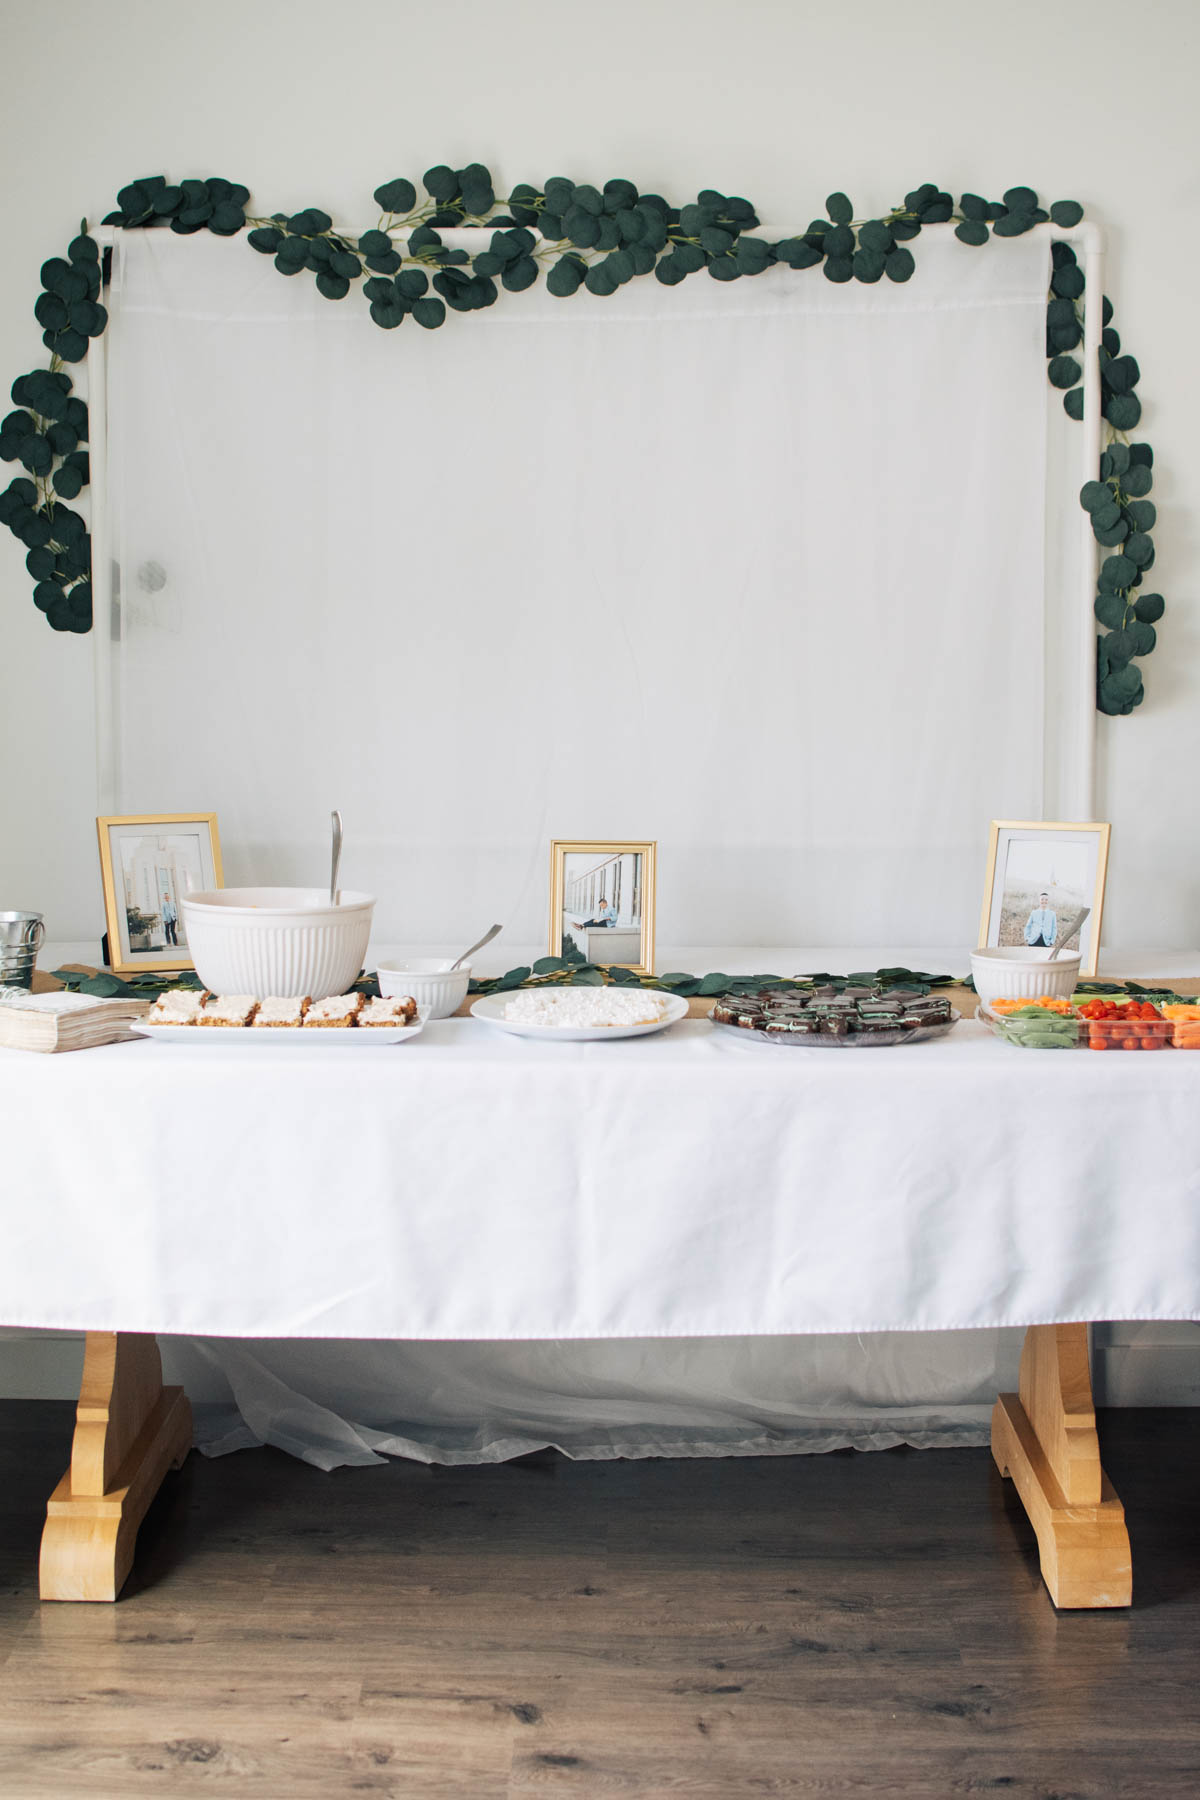 LDS baptism party backdrop with eucalyptus garland and food table with white table cloth.